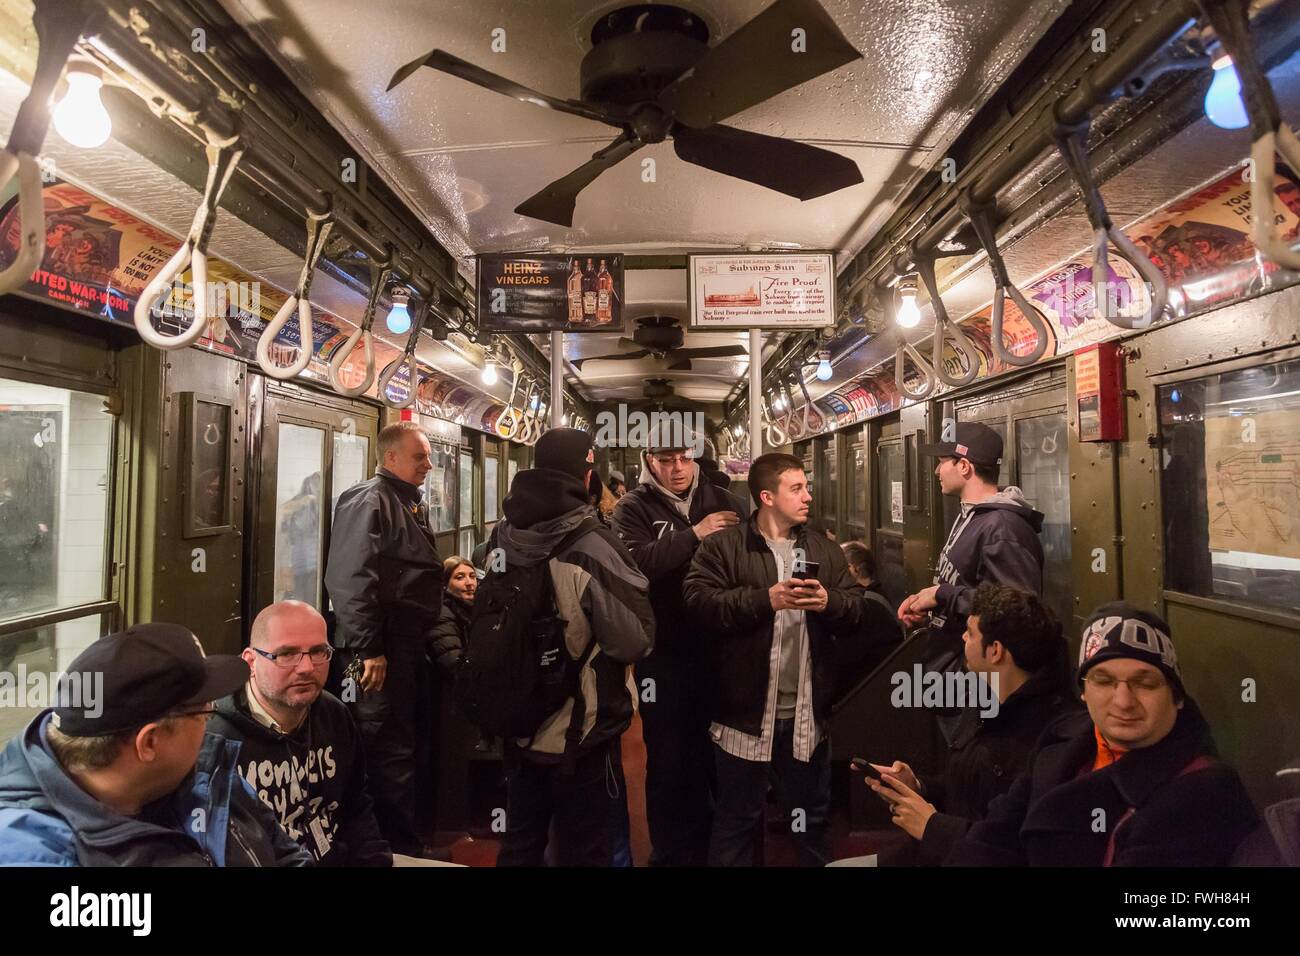 New York, USA. 5th Apr, 2016. Baseball fans ride the 'Nostalgia Special' train to Yankee Stadium in New York, the United States, April 5, 2016. The New York Metropolitan Transportation Authority rolls out a vintage train to take baseball fans to Yankee Stadium for the season's home opening game. Dubbed 'the Nostalgia Special', the antique train dates back to 1917, and was retired in the early 1960s. Credit:  Li Changxiang/Xinhua/Alamy Live News Stock Photo